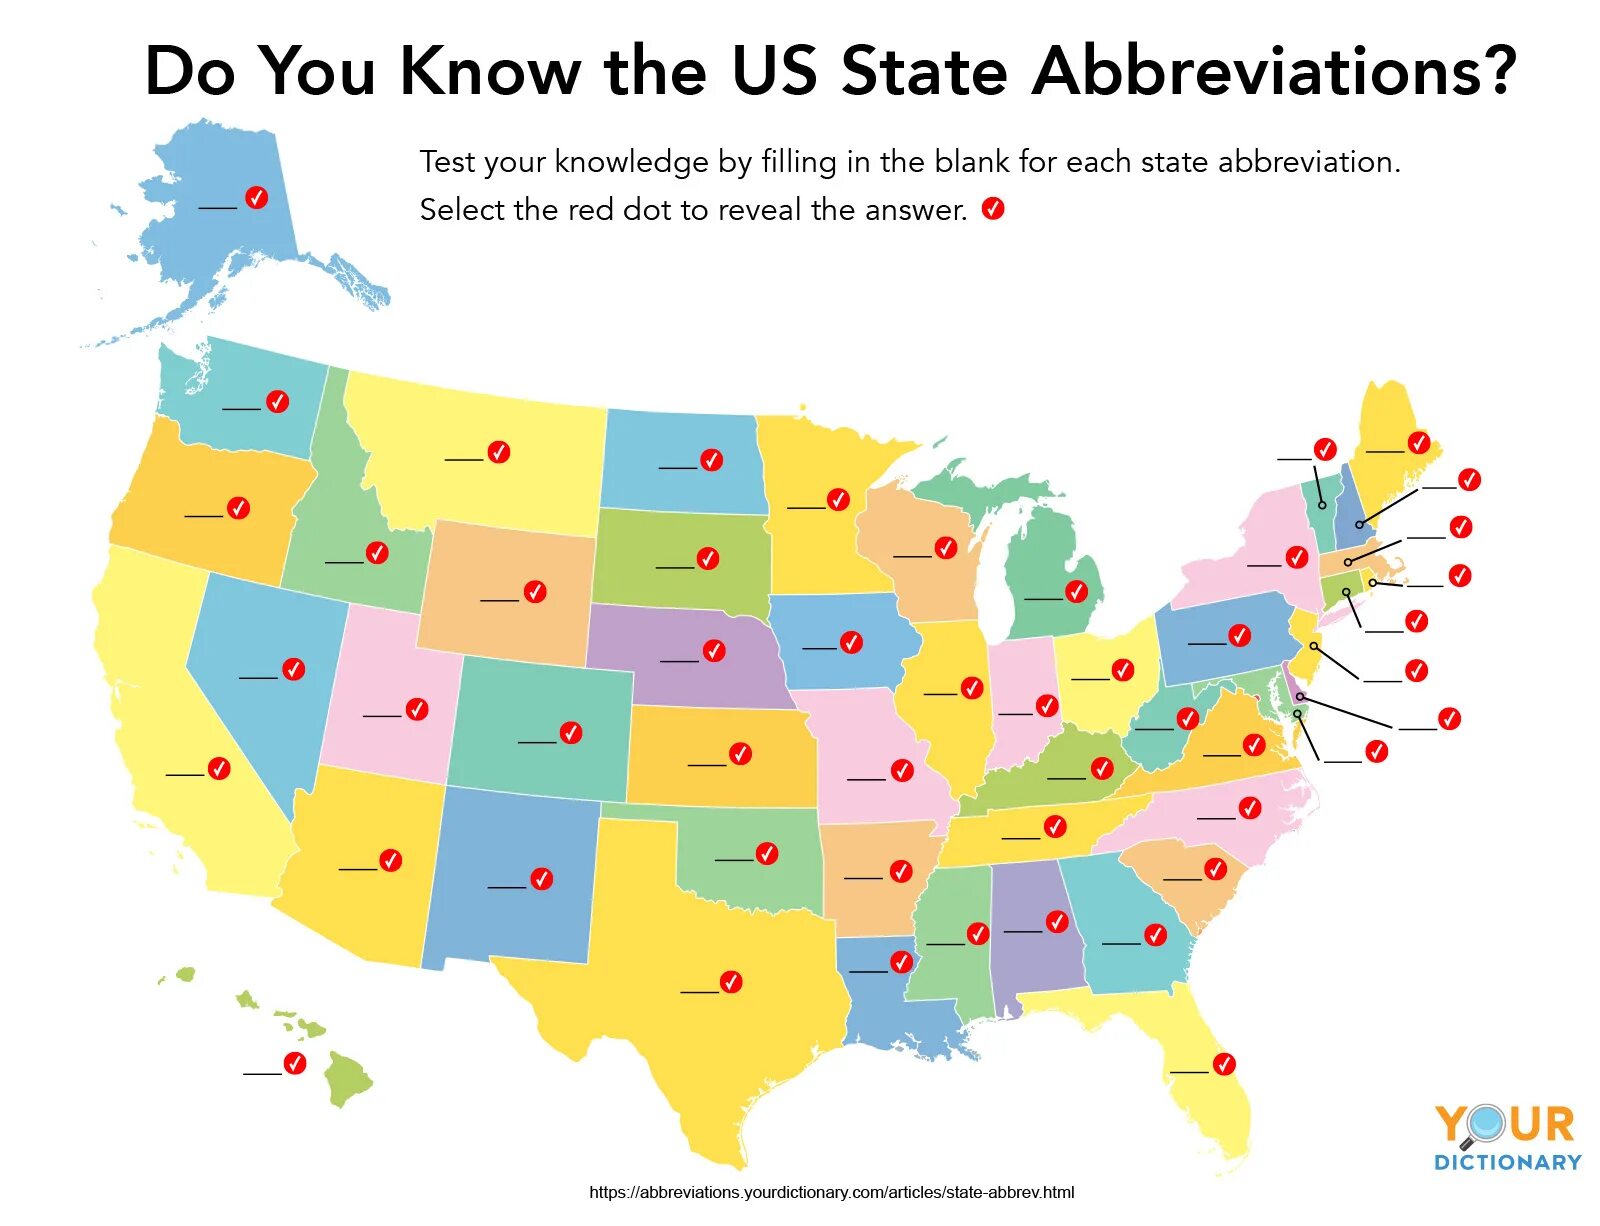 Abbreviation of States. Abbreviations of the States of America. Us States abbreviations. USA Map abbreviation.